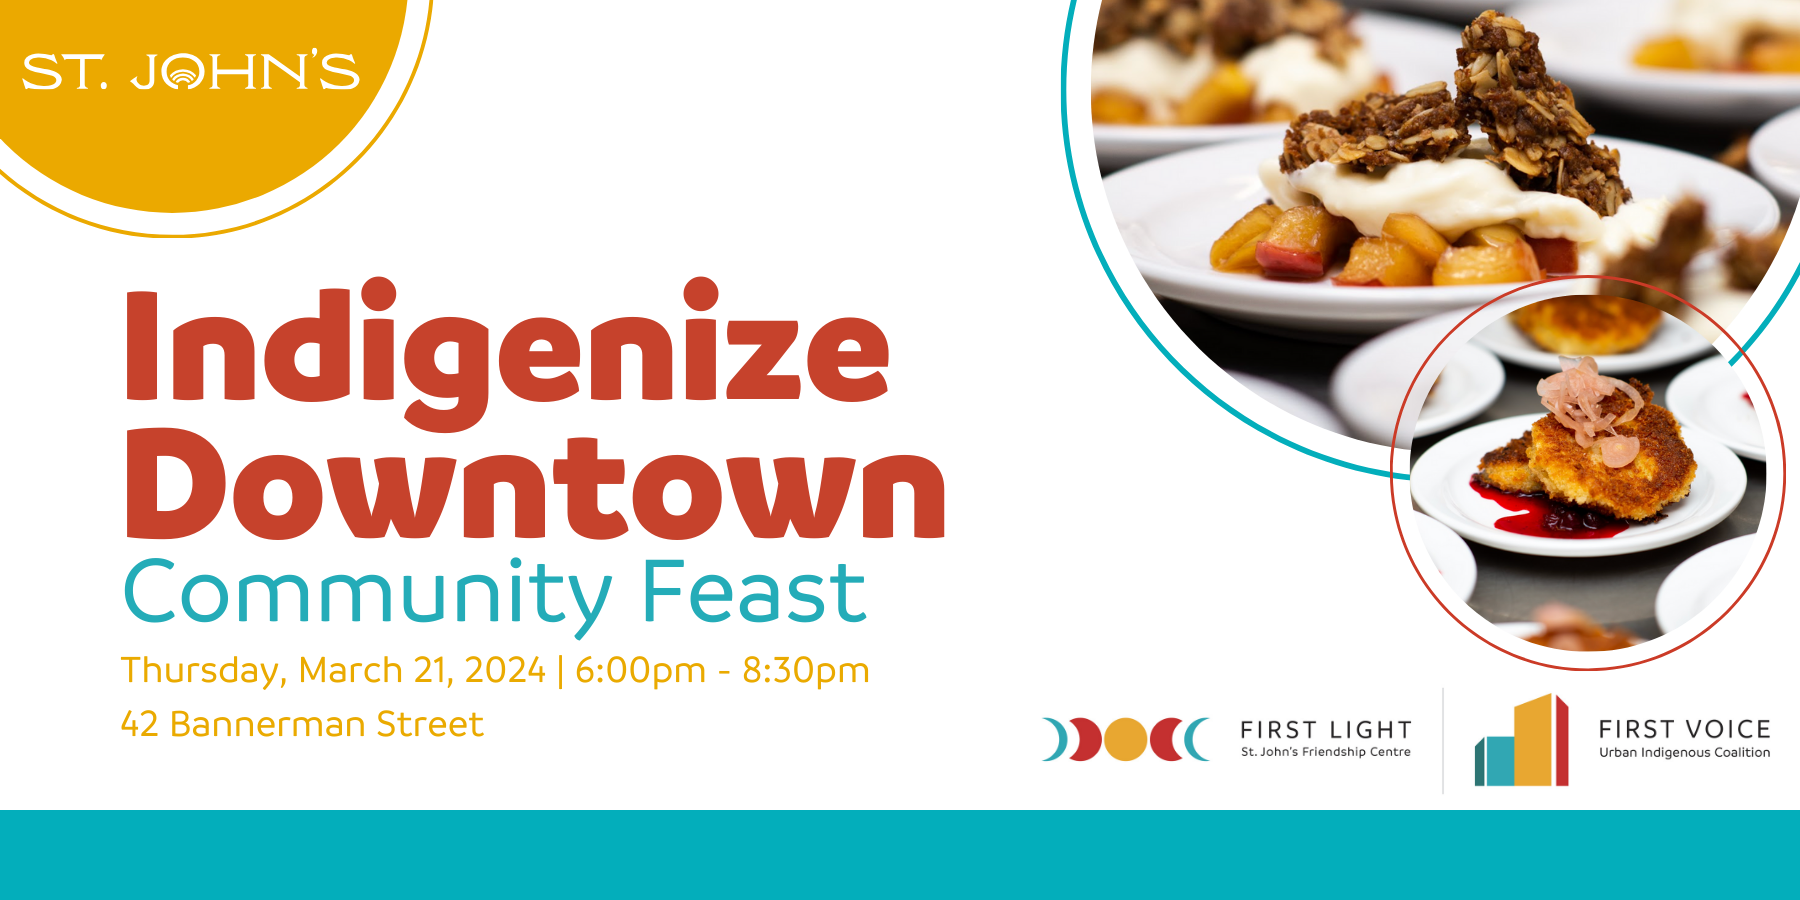 White background with text "Indigenize Downtown Community Feast, Thursday, March 21, 2024, 42 Bannerman St" with two photos of food  